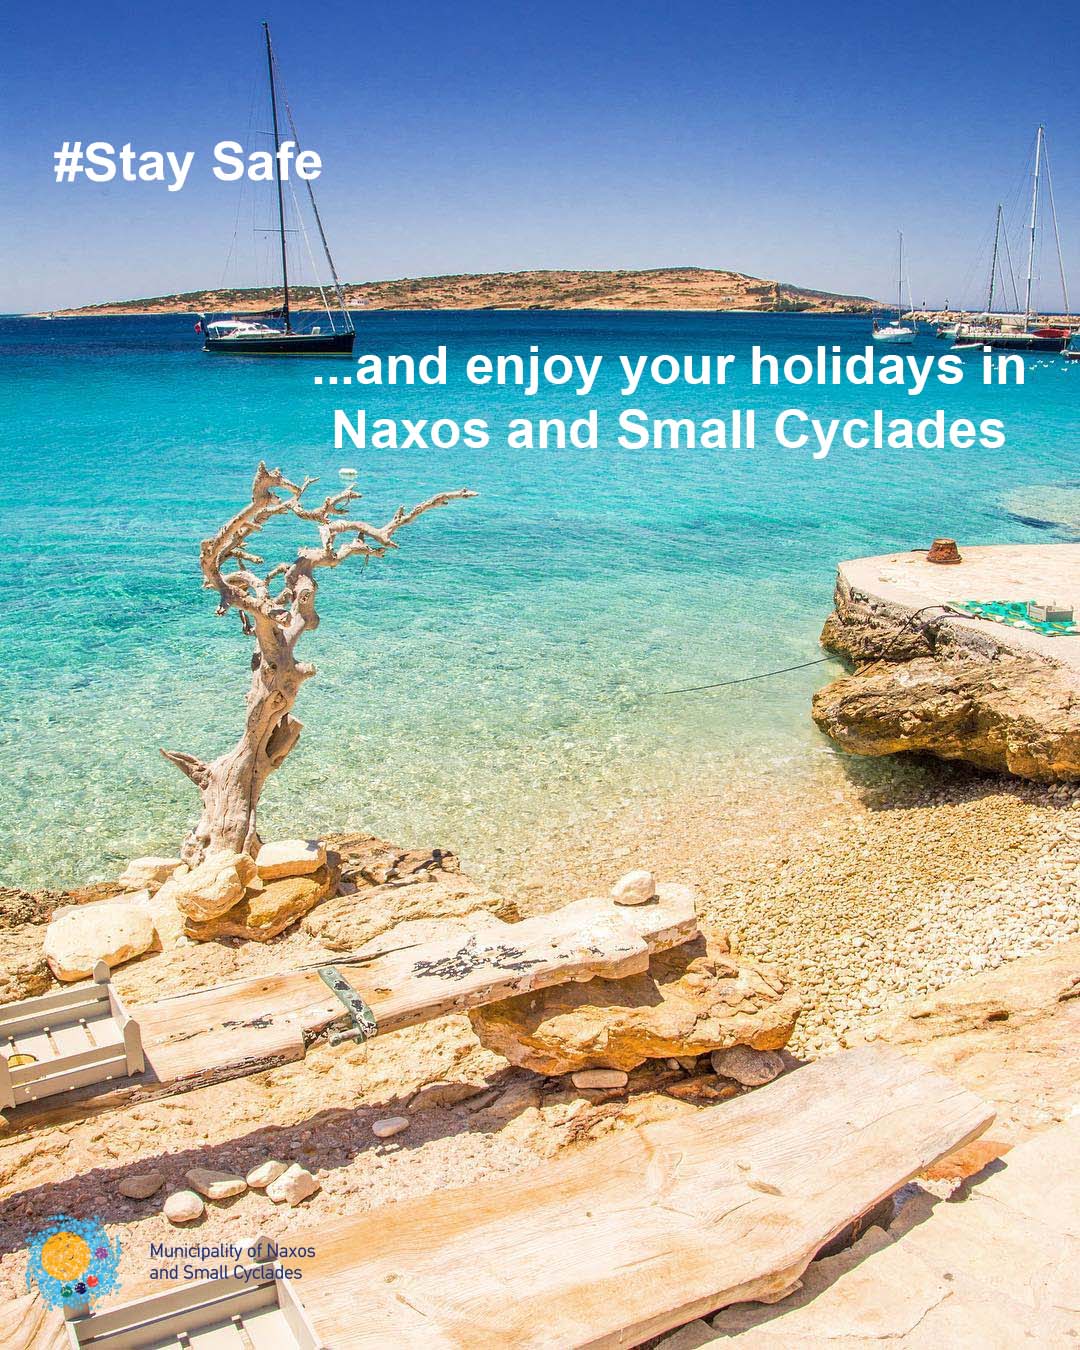 Health Safety directions for Visitors in Naxos and Small Cyclades